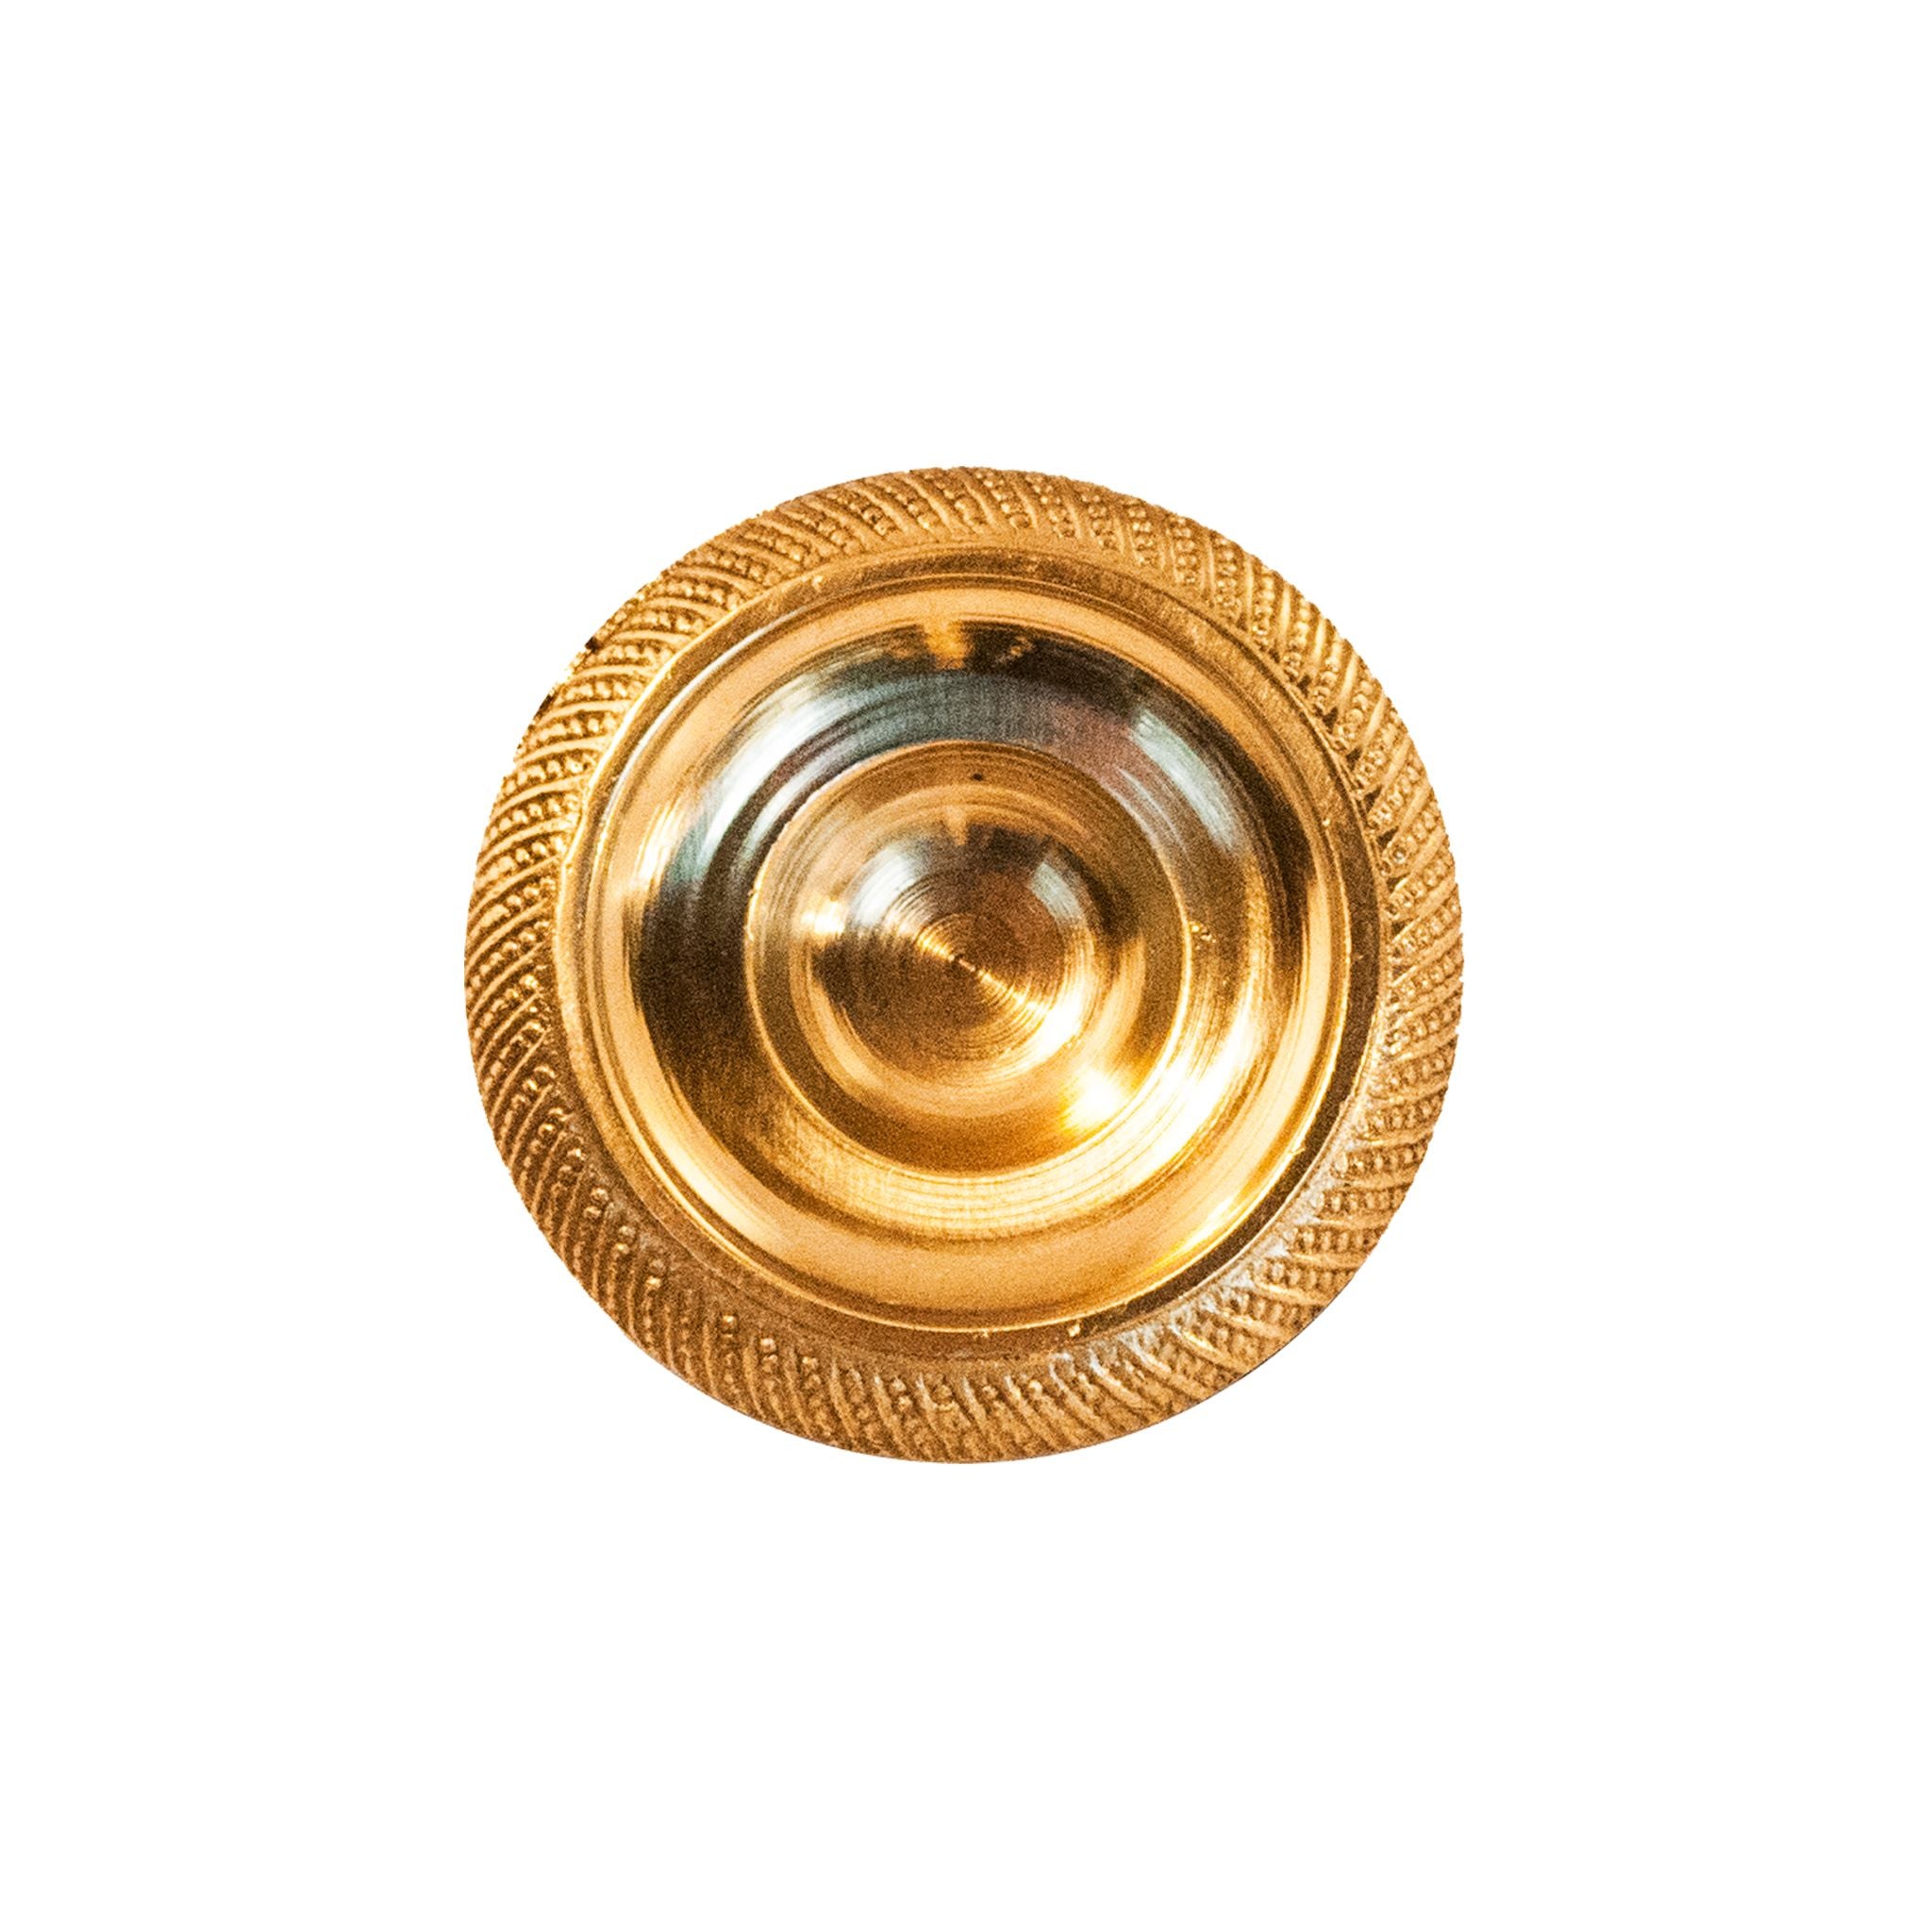 A polished, circular brass knob with intricate decorative patterns, designed for use on cabinets, drawers, and doors.